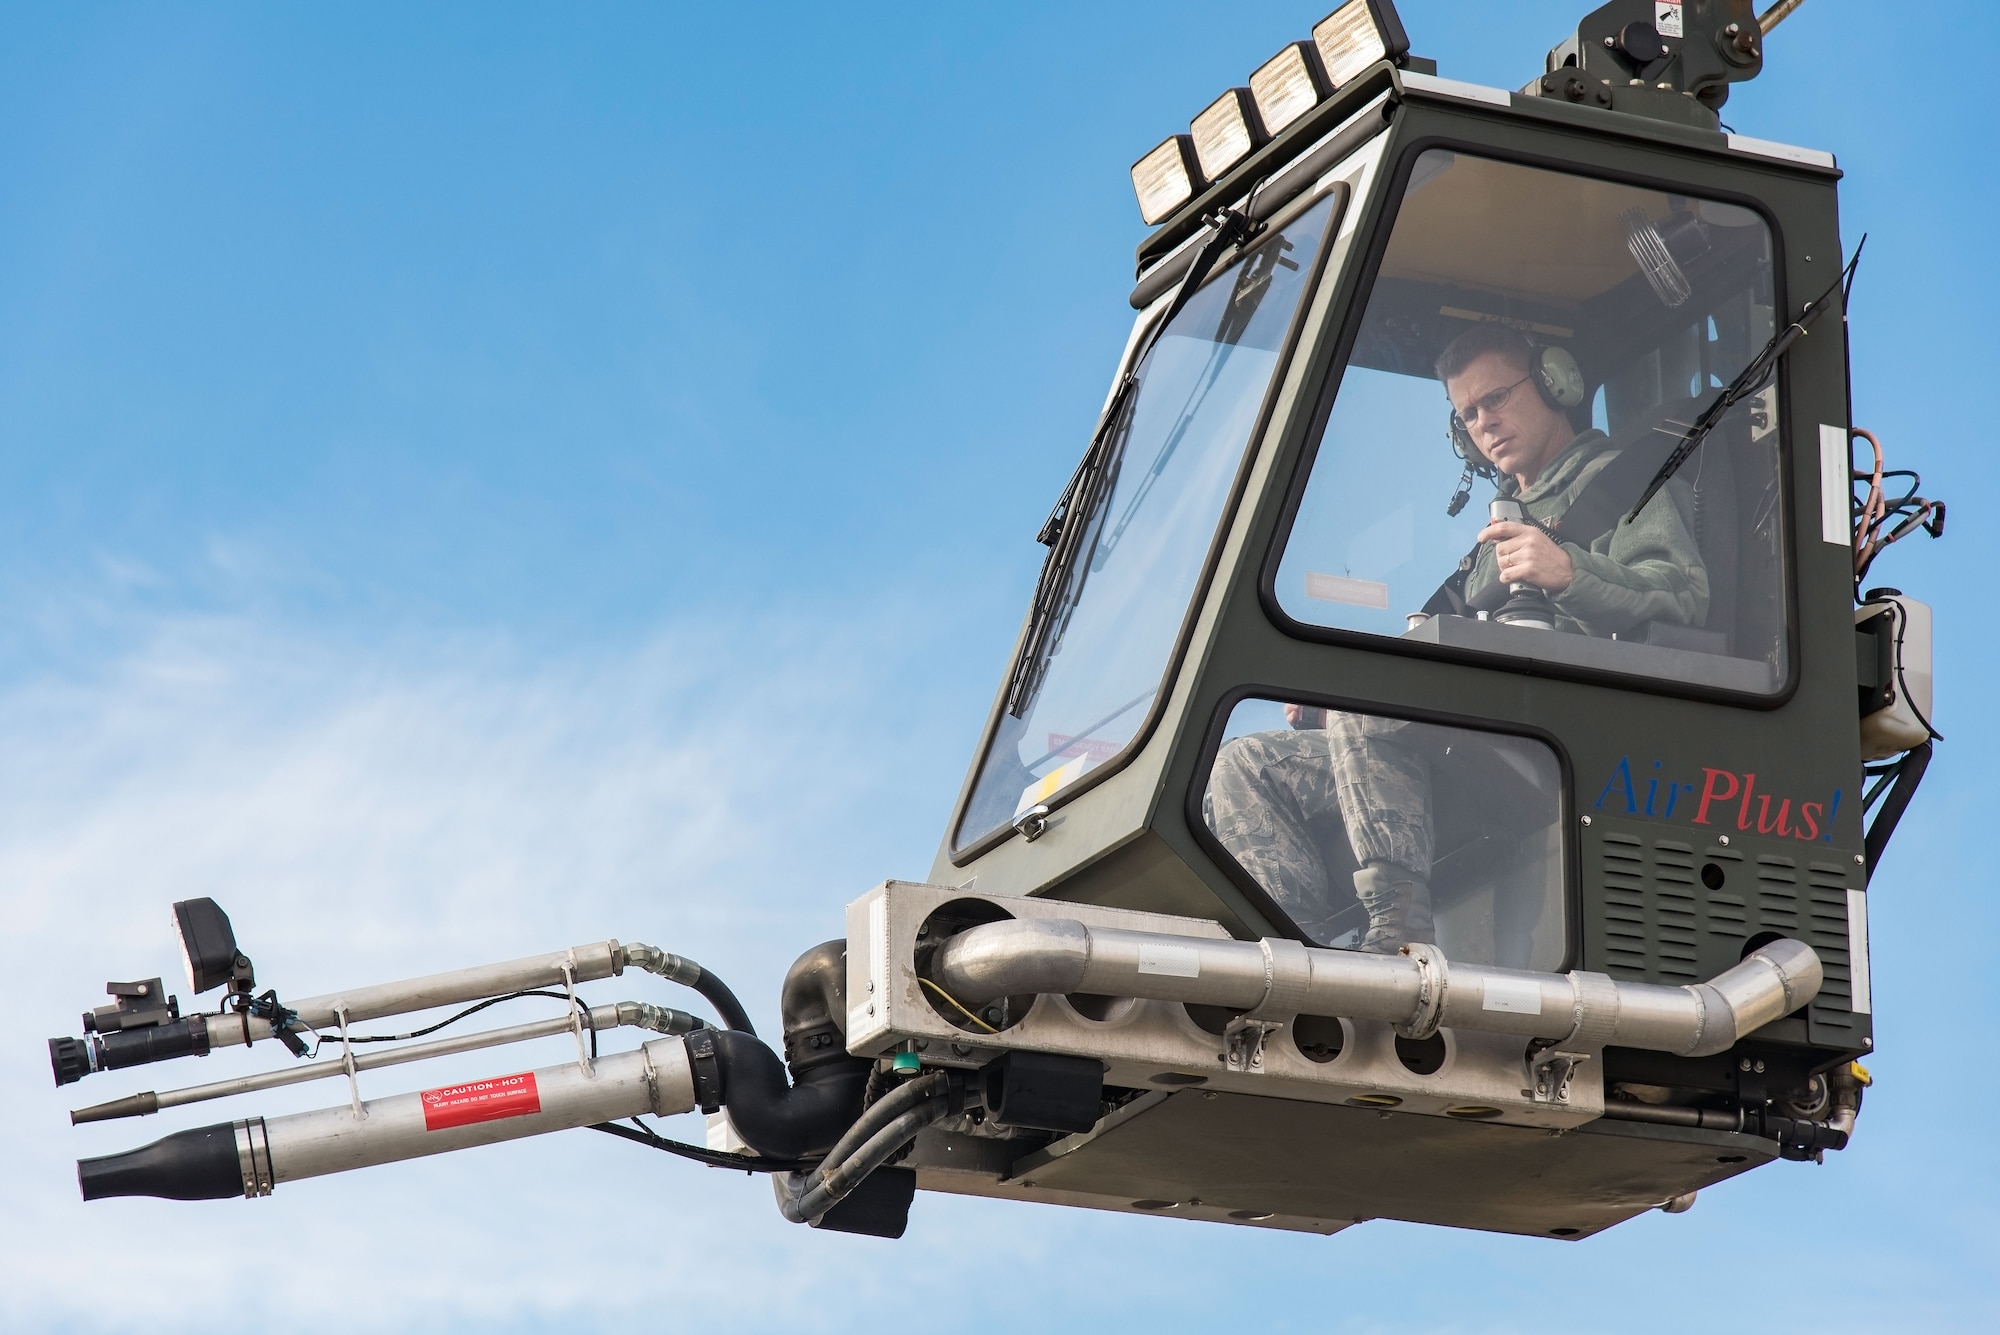 Brig. Gen. Steven Bleymaier, Director of Logistics, Engineering and Force Protection, Headquarters Air Mobility Command, Scott Air Force Base, Ill., steers a GL2875 High Reach Deicer during a test ride Nov. 30, 2017, on Dover Air Force Base, Del. Bleymaier visited 436th Logistics Readiness Squadron personnel assigned to the Heavy Equipment Vehicle Maintenance section. (U.S. Air Force photo by Roland Balik)